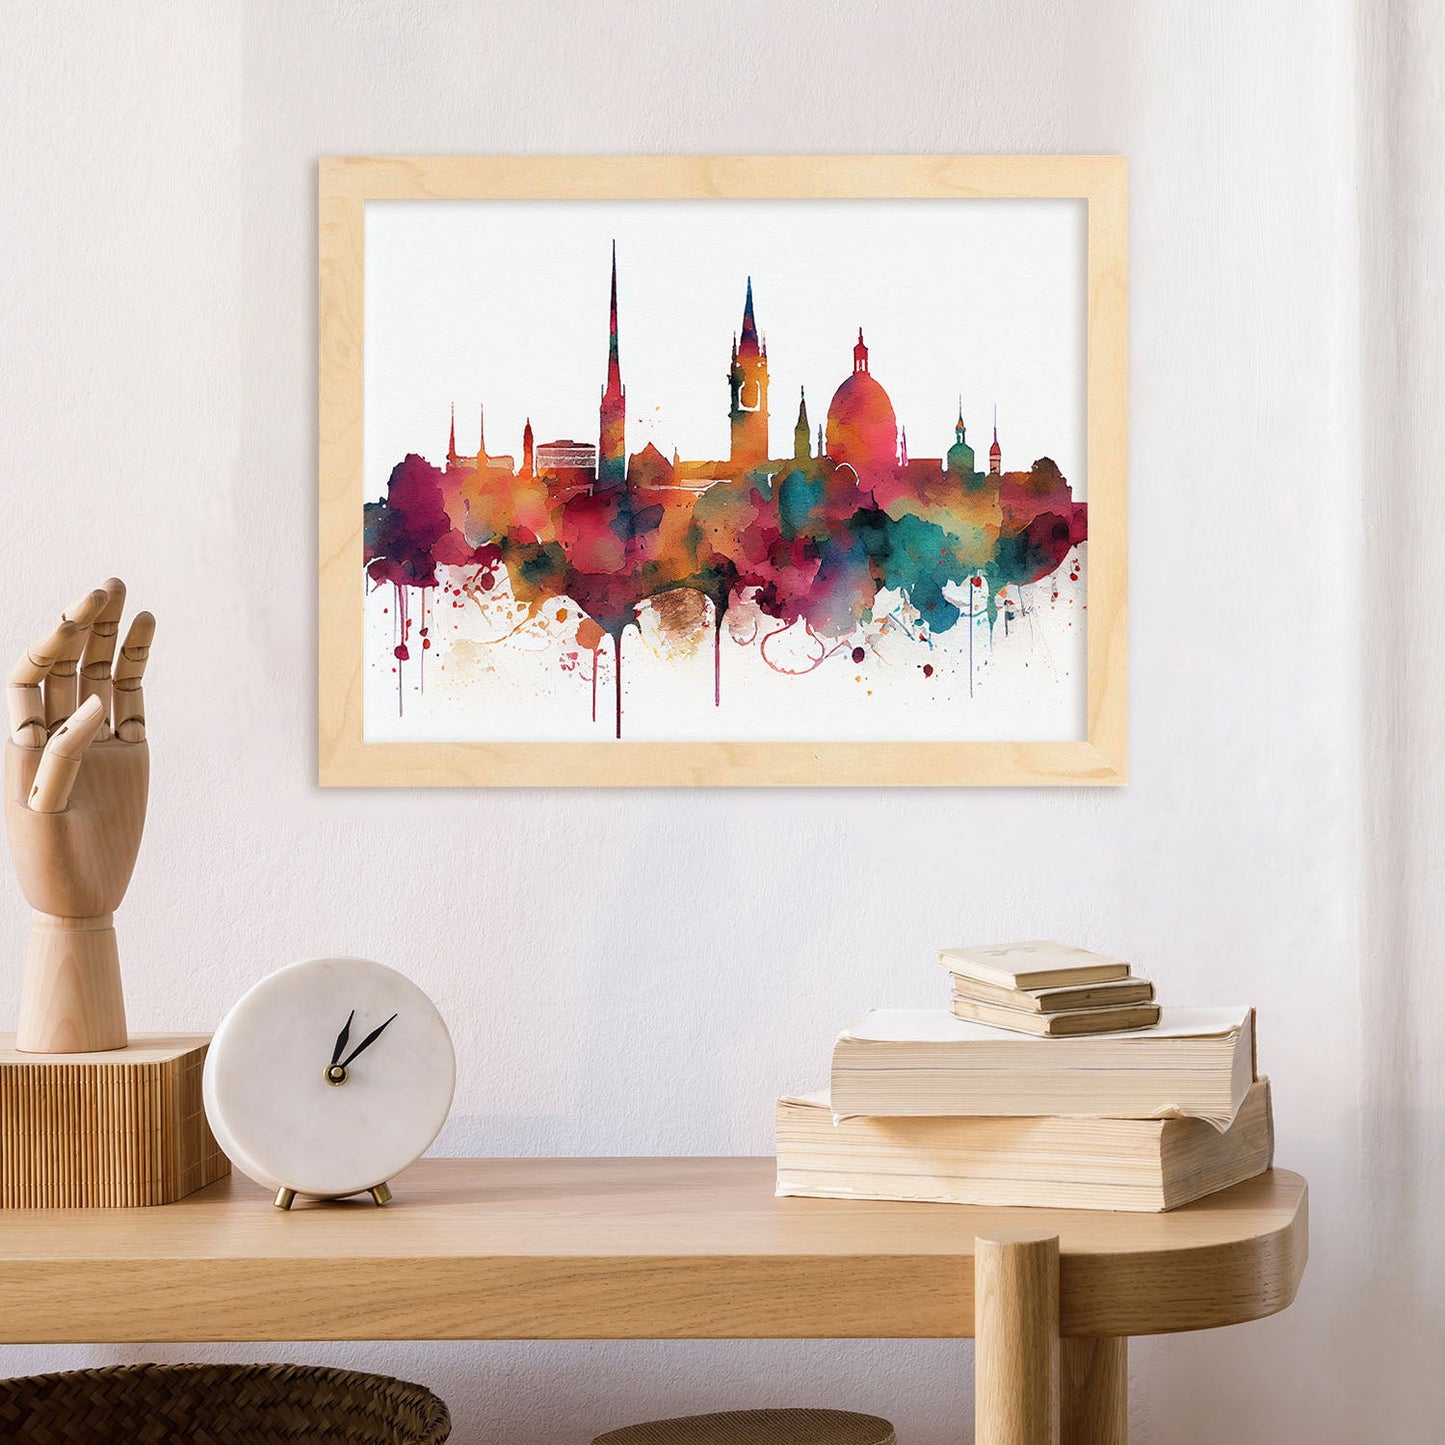 Nacnic watercolor of a skyline of the city of Stuttgart. Aesthetic Wall Art Prints for Bedroom or Living Room Design.